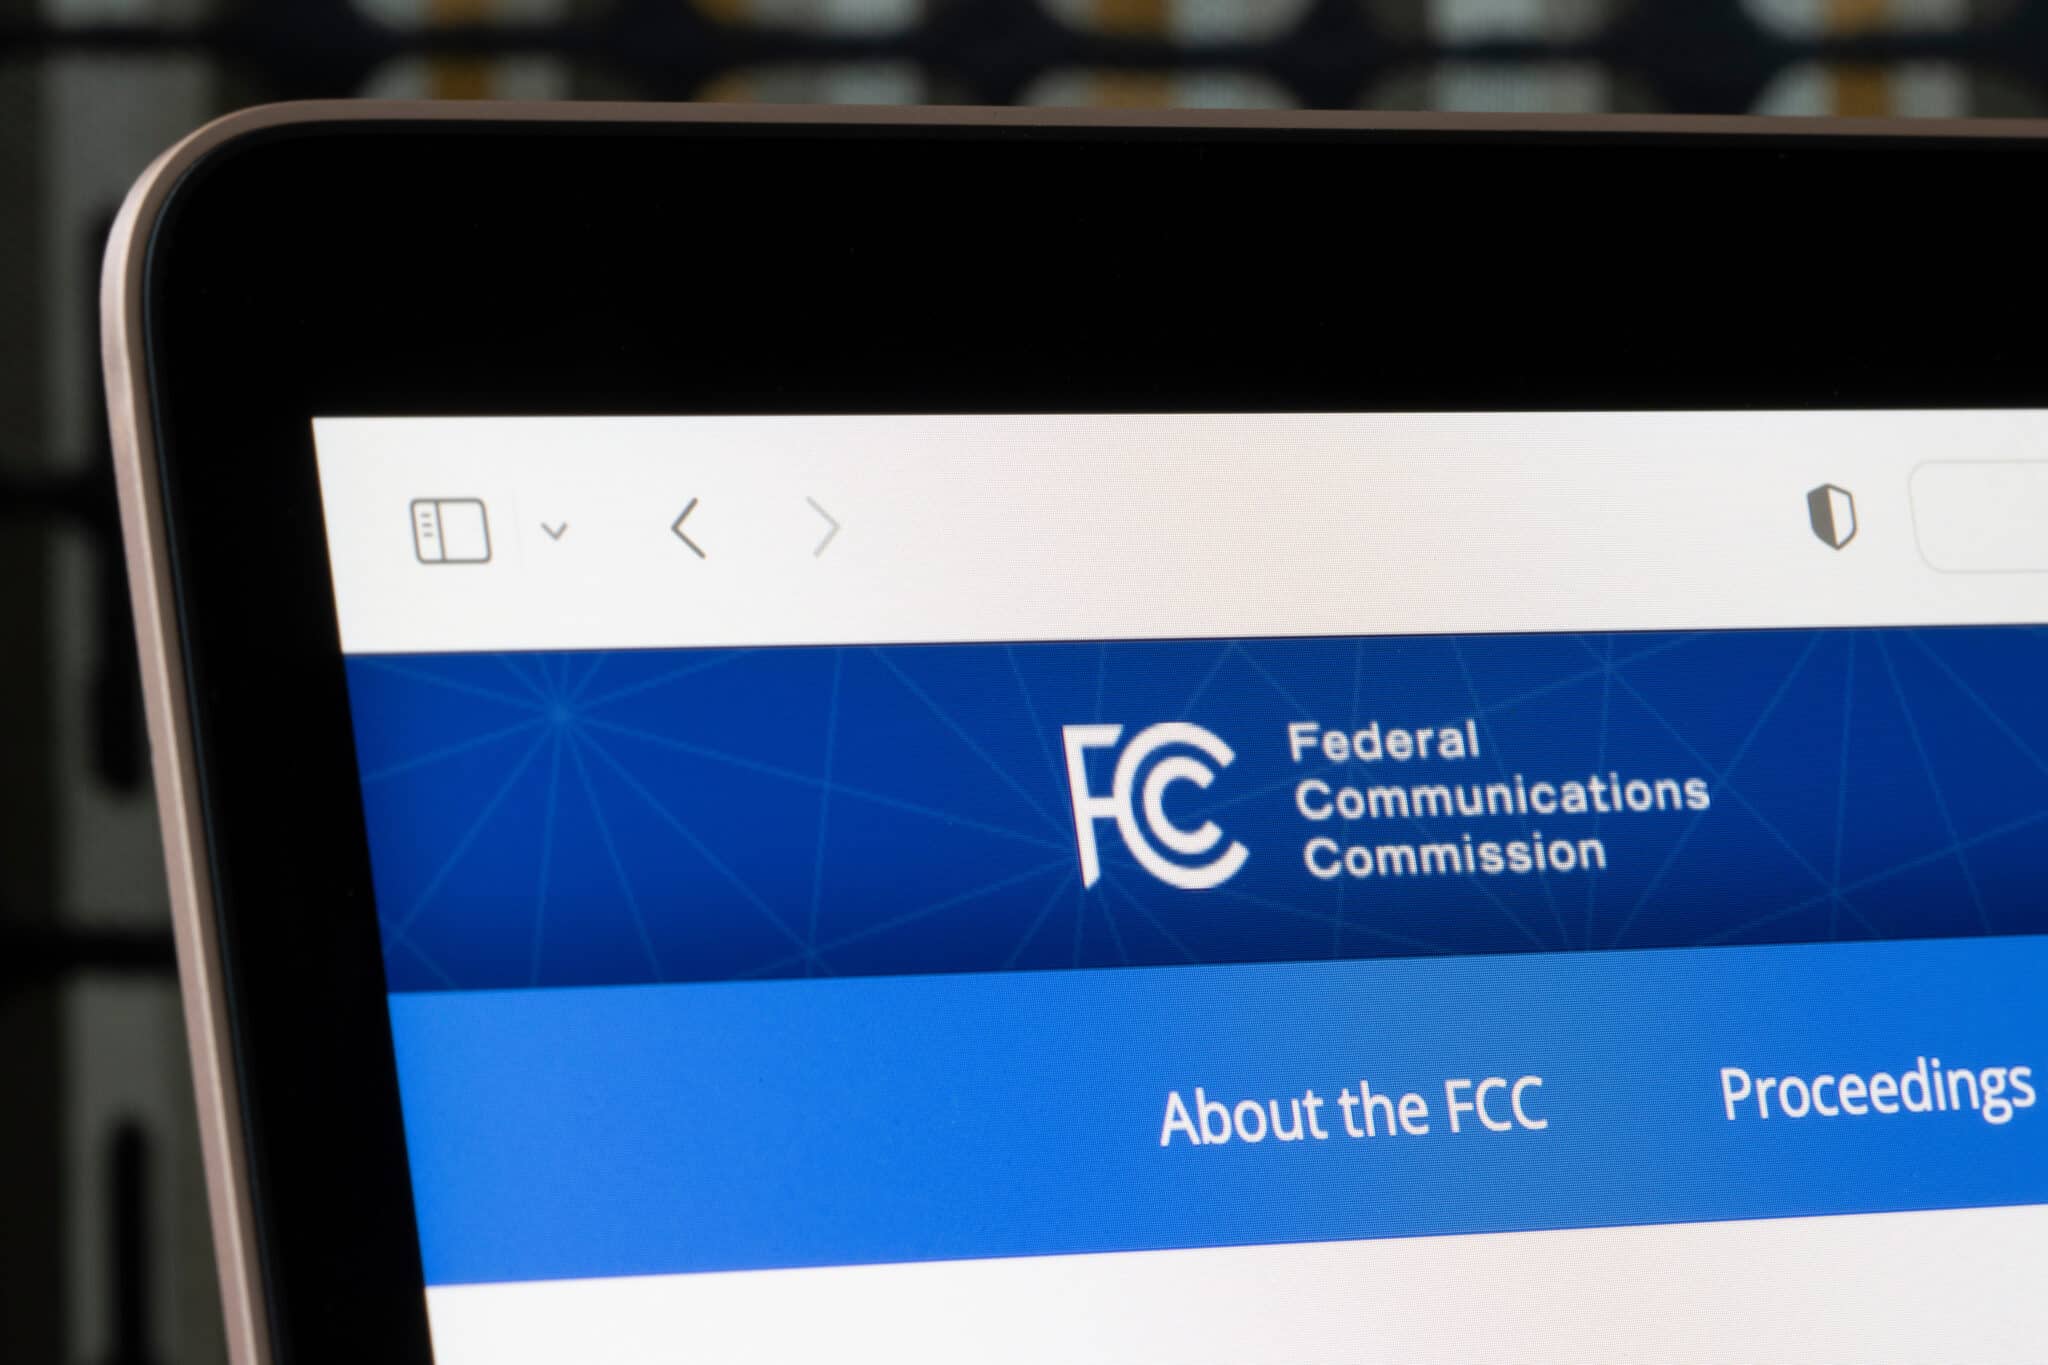 FCC homepage on laptop highlights their regulation of media like TV, relevant to closed captioning.